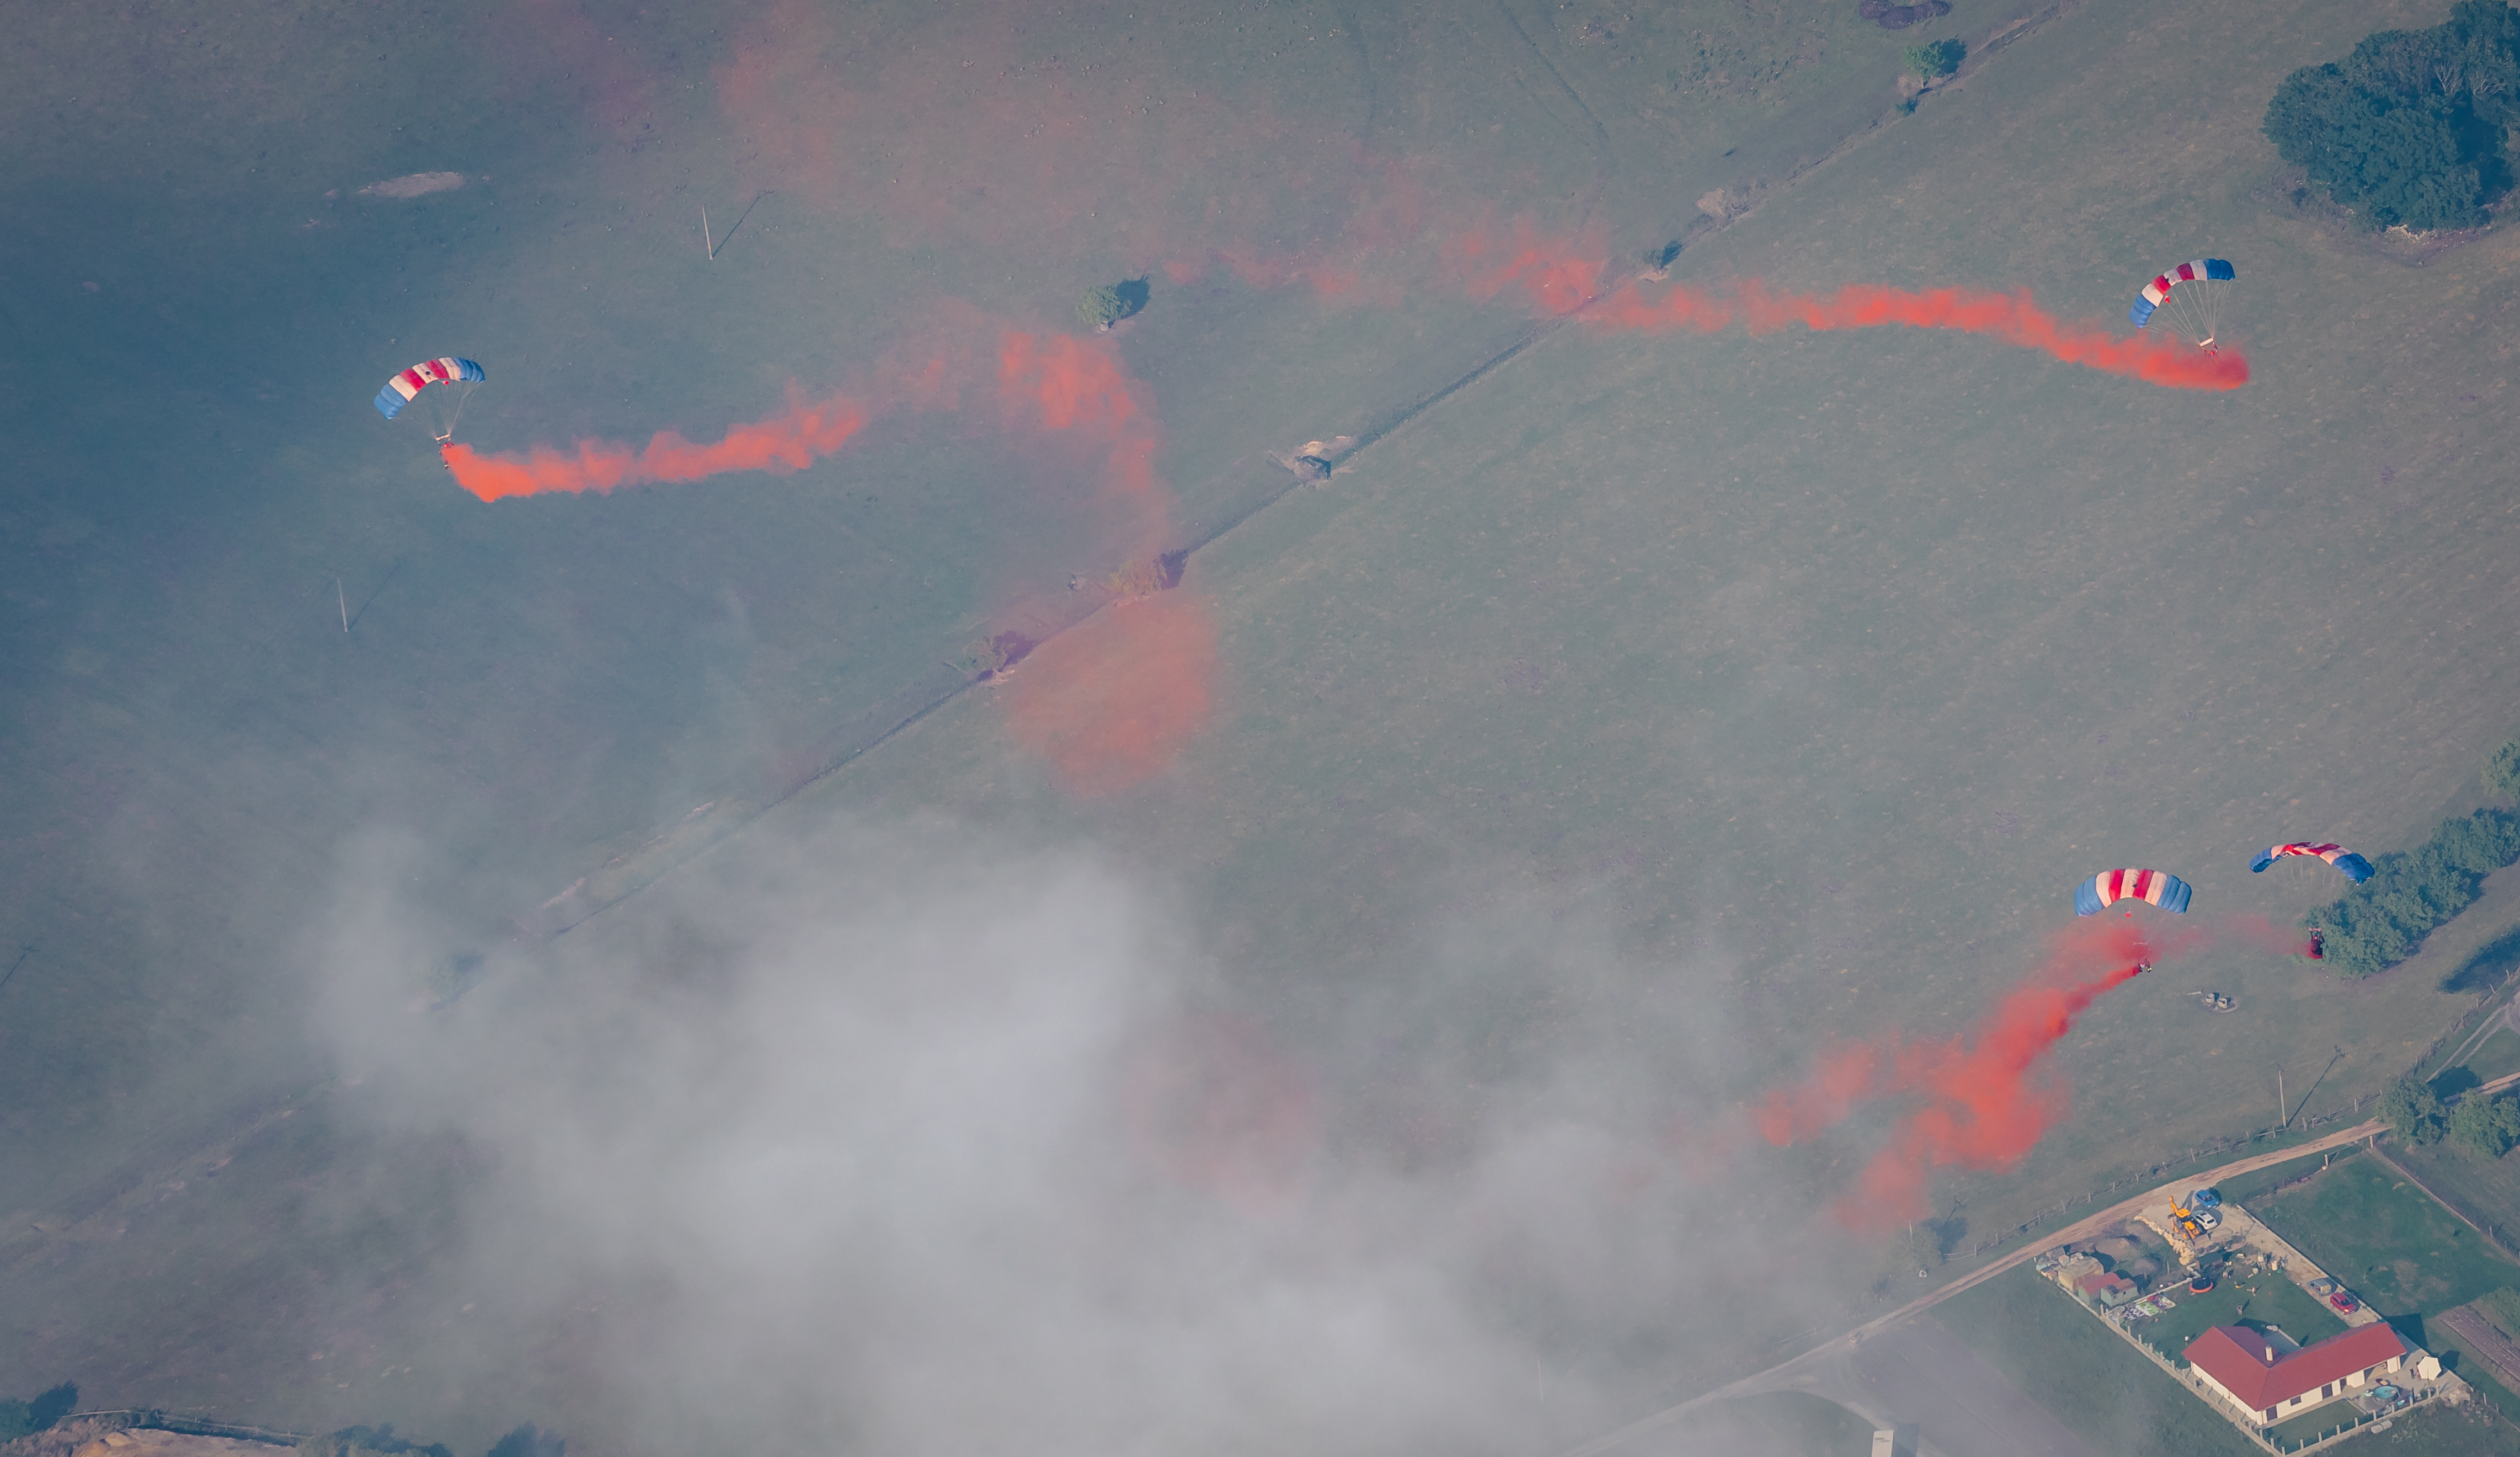 Image shows RAF Falcons team falling with parachutes deployed and red smoke trails.